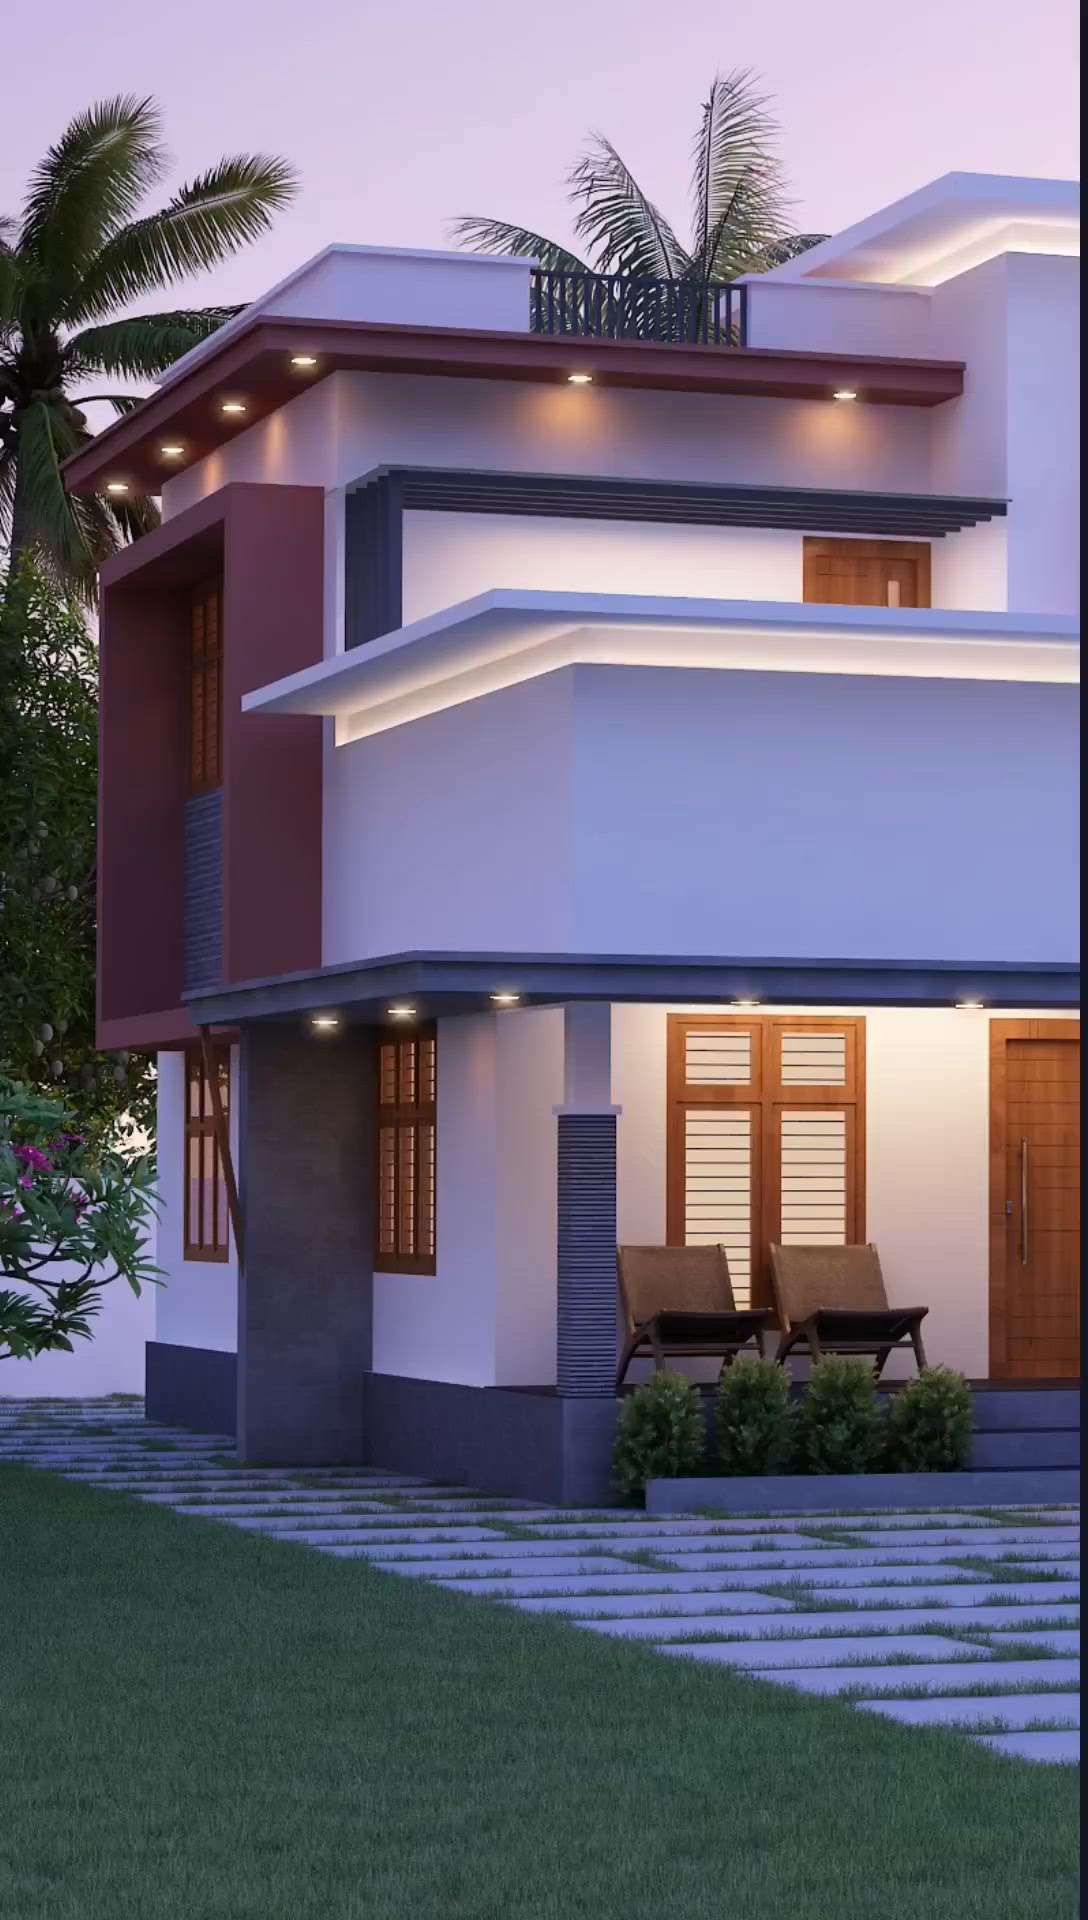 Residence Area 1200 sqft clinet Mr Manoj
3Bedroom attached
Living/ Dinning / sit out